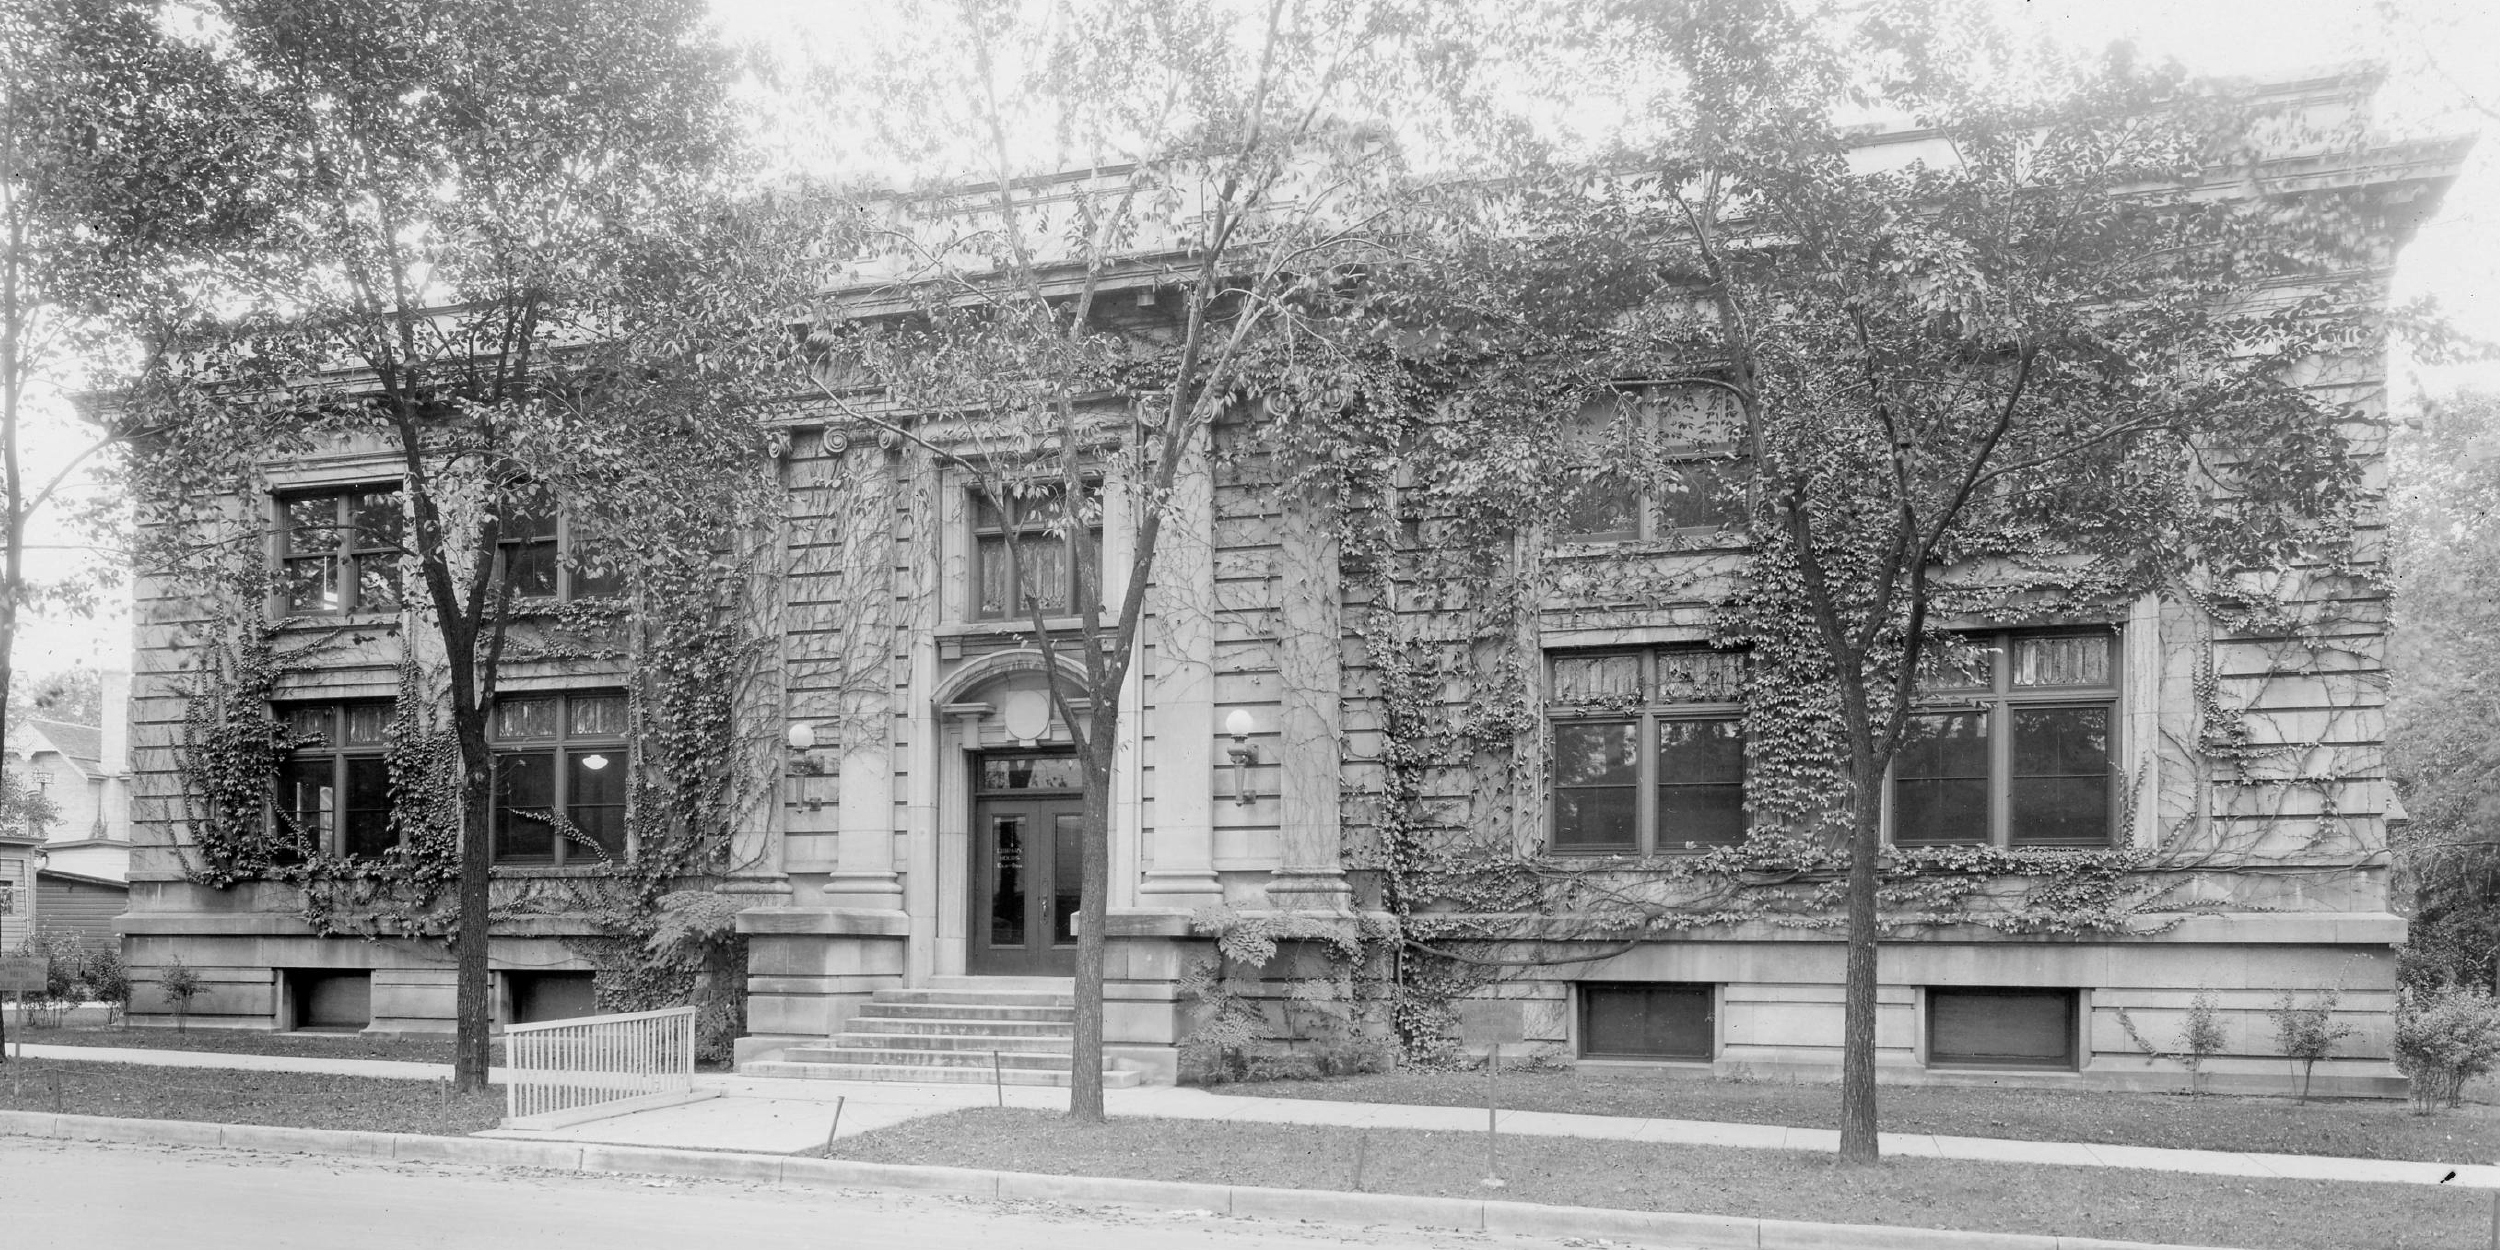 A photo of the completed Carnegie library building in 1903.